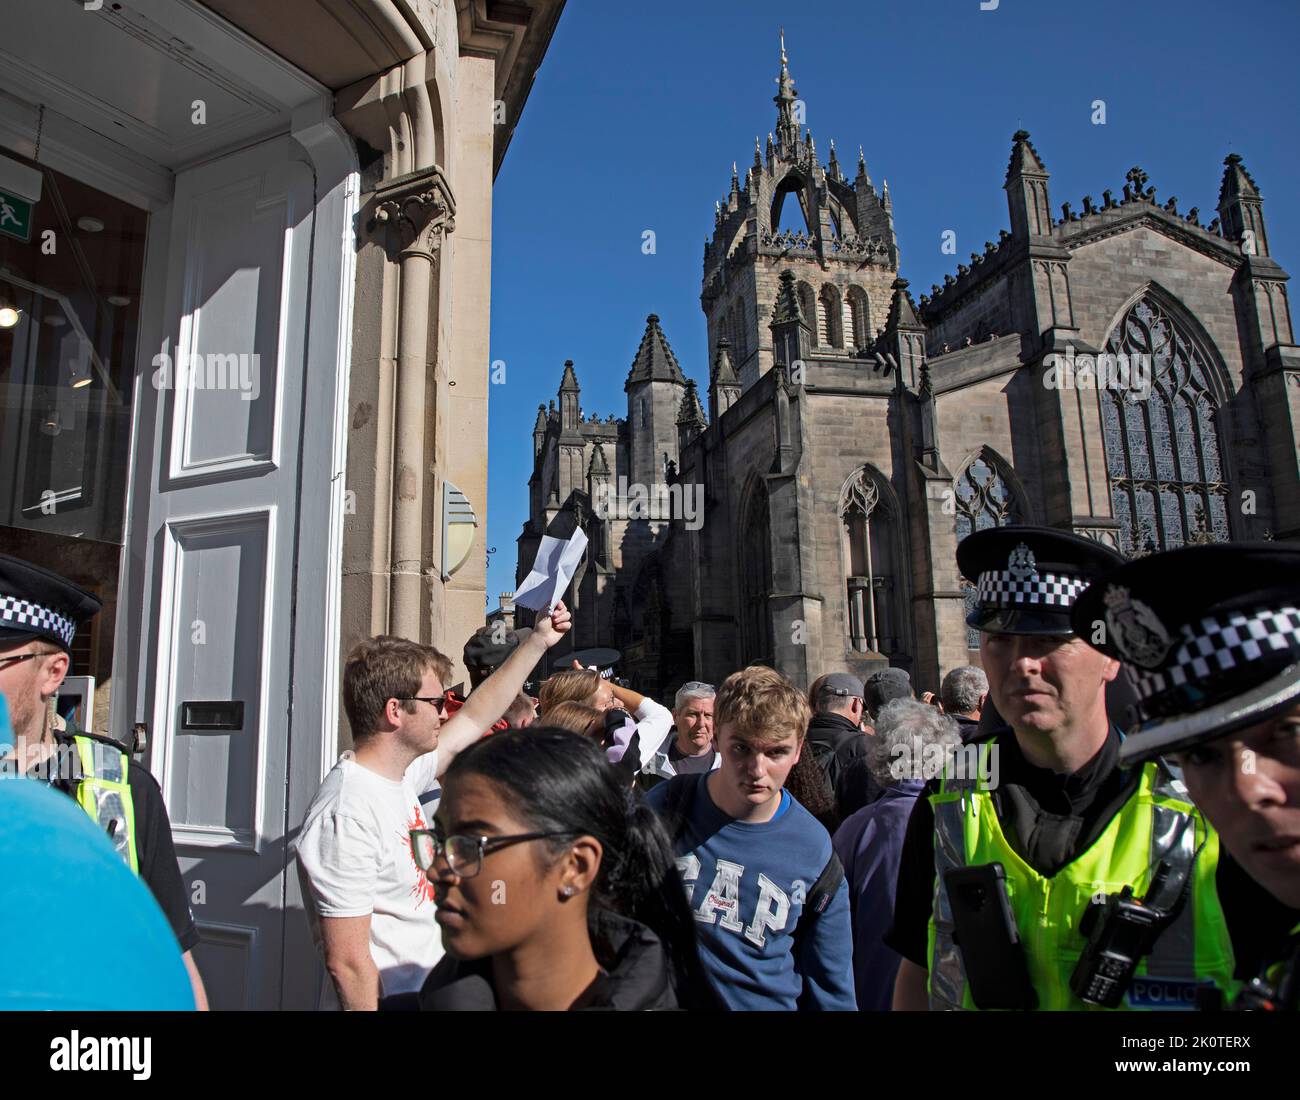 Royal Mile, Edinburgh, Scotland, UK. Crowds gather for Coffin of Her Majesty Queen Elizabeth II departing St Giles Cathedral. 13th September 2022. Pictured: One young man holds up a piece of paper as a protest, believed to be blank as police officers and pedestrians pass. Credit: Arch White/alamy live news. Stock Photo